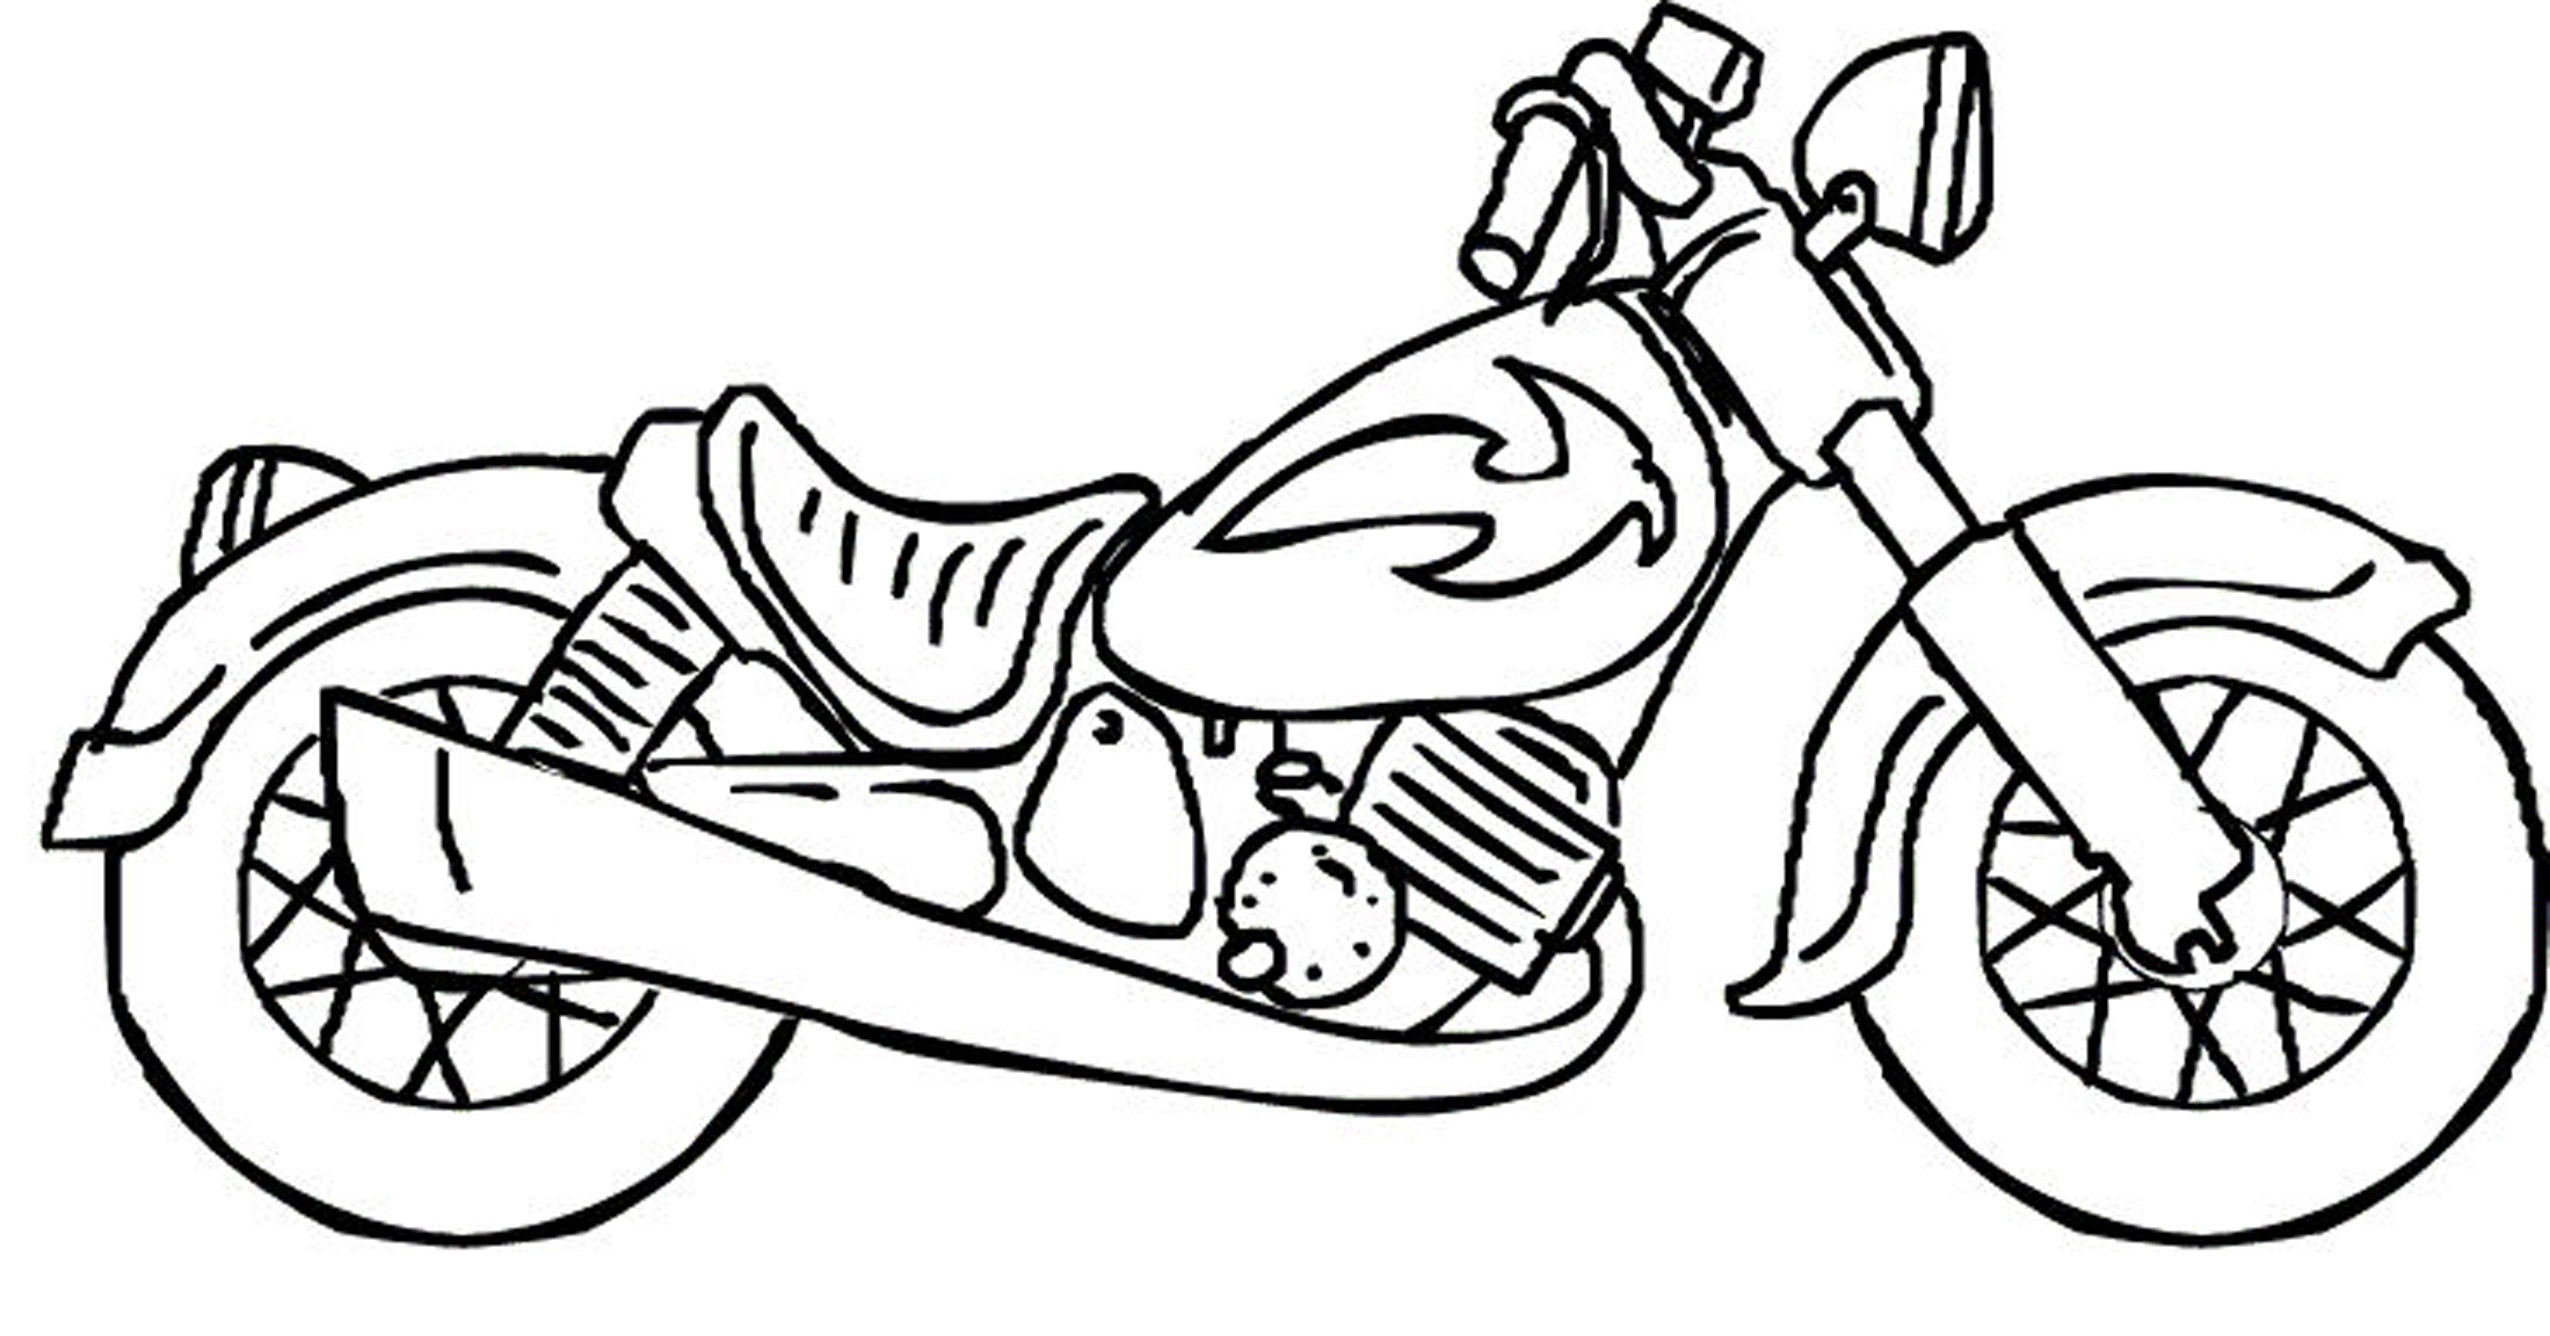 Free Print Coloring Pages For Boys
 Printable Coloring Pages For Boys